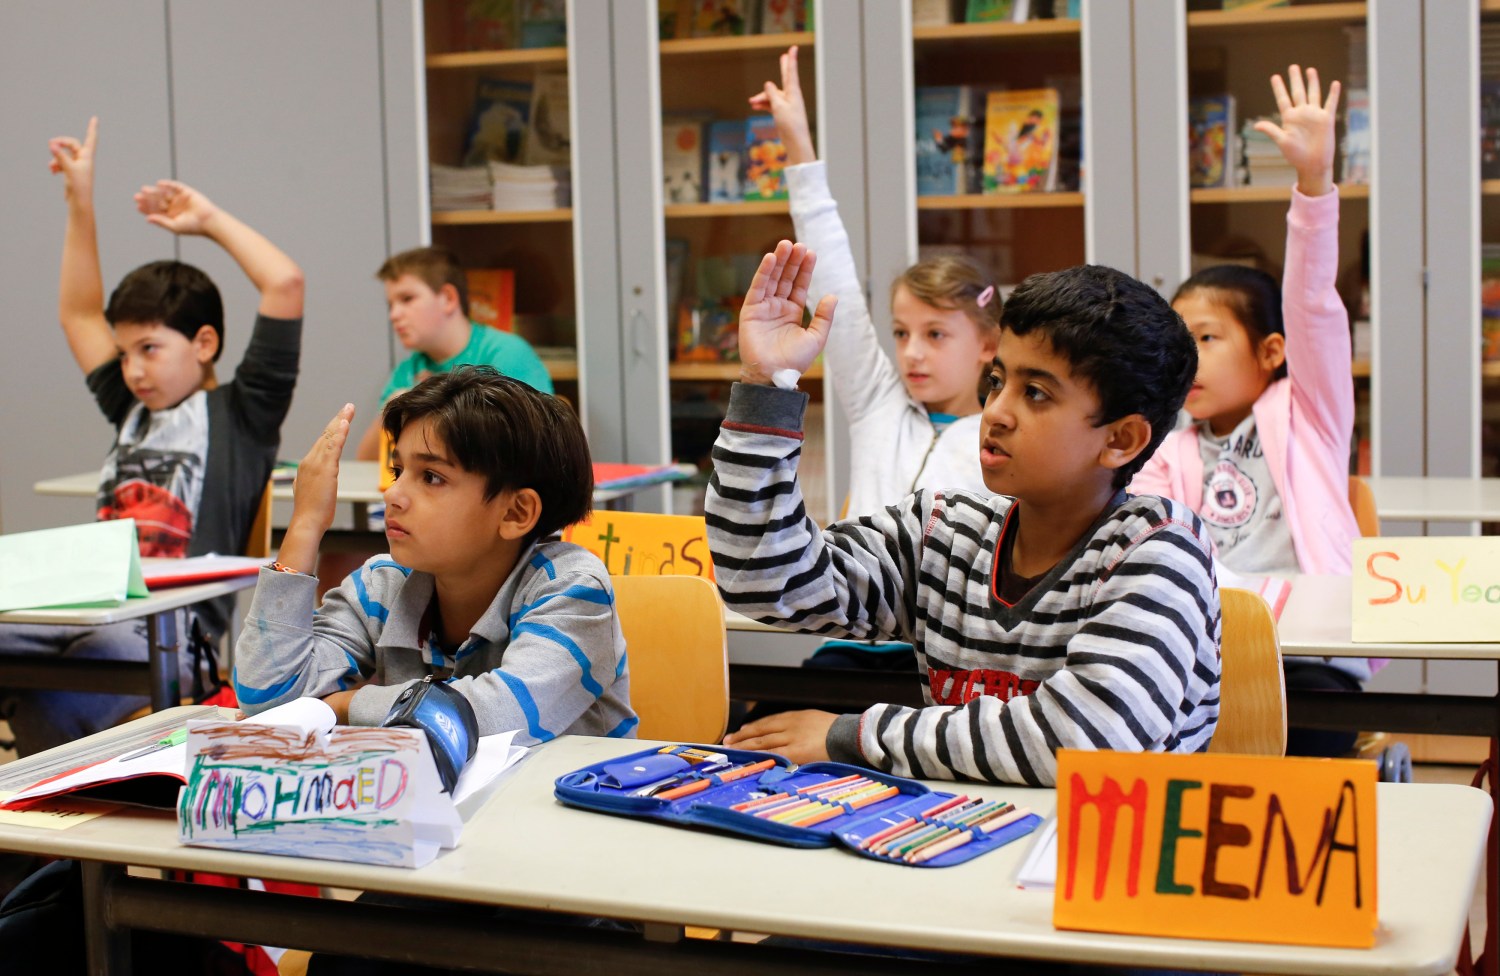 Children of a welcome class for immigrants from Syria, Poland and Romania attend a German lesson at the Katharina-Heinroth primary school in Berlin, Germany, September 11, 2015.  REUTERS/Fabrizio Bensch - LR2EB9B0UUVVF